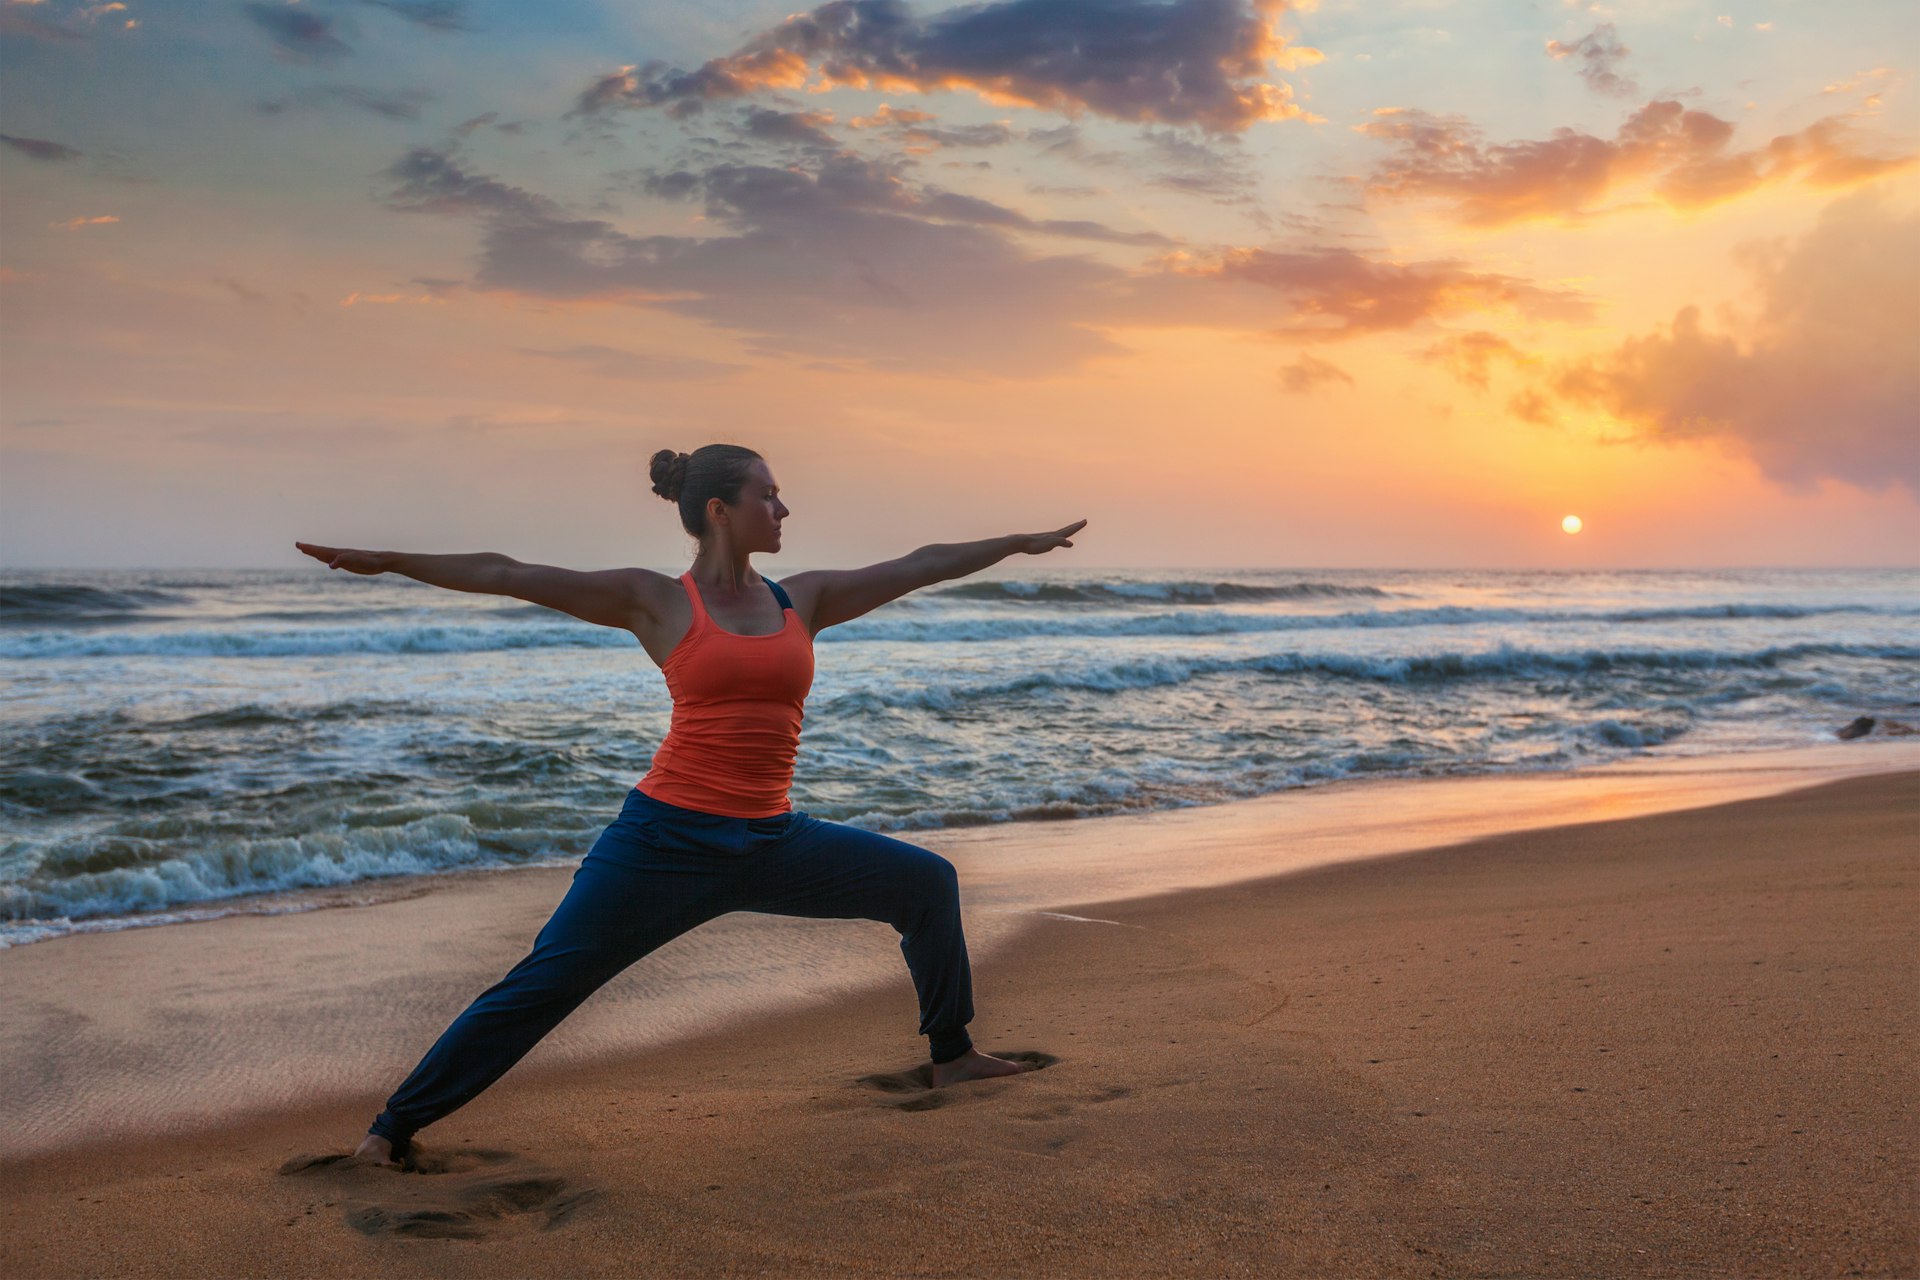 Woman doing a Virabhadrasana stance while practising Hatha yoga on a beach during sunset.